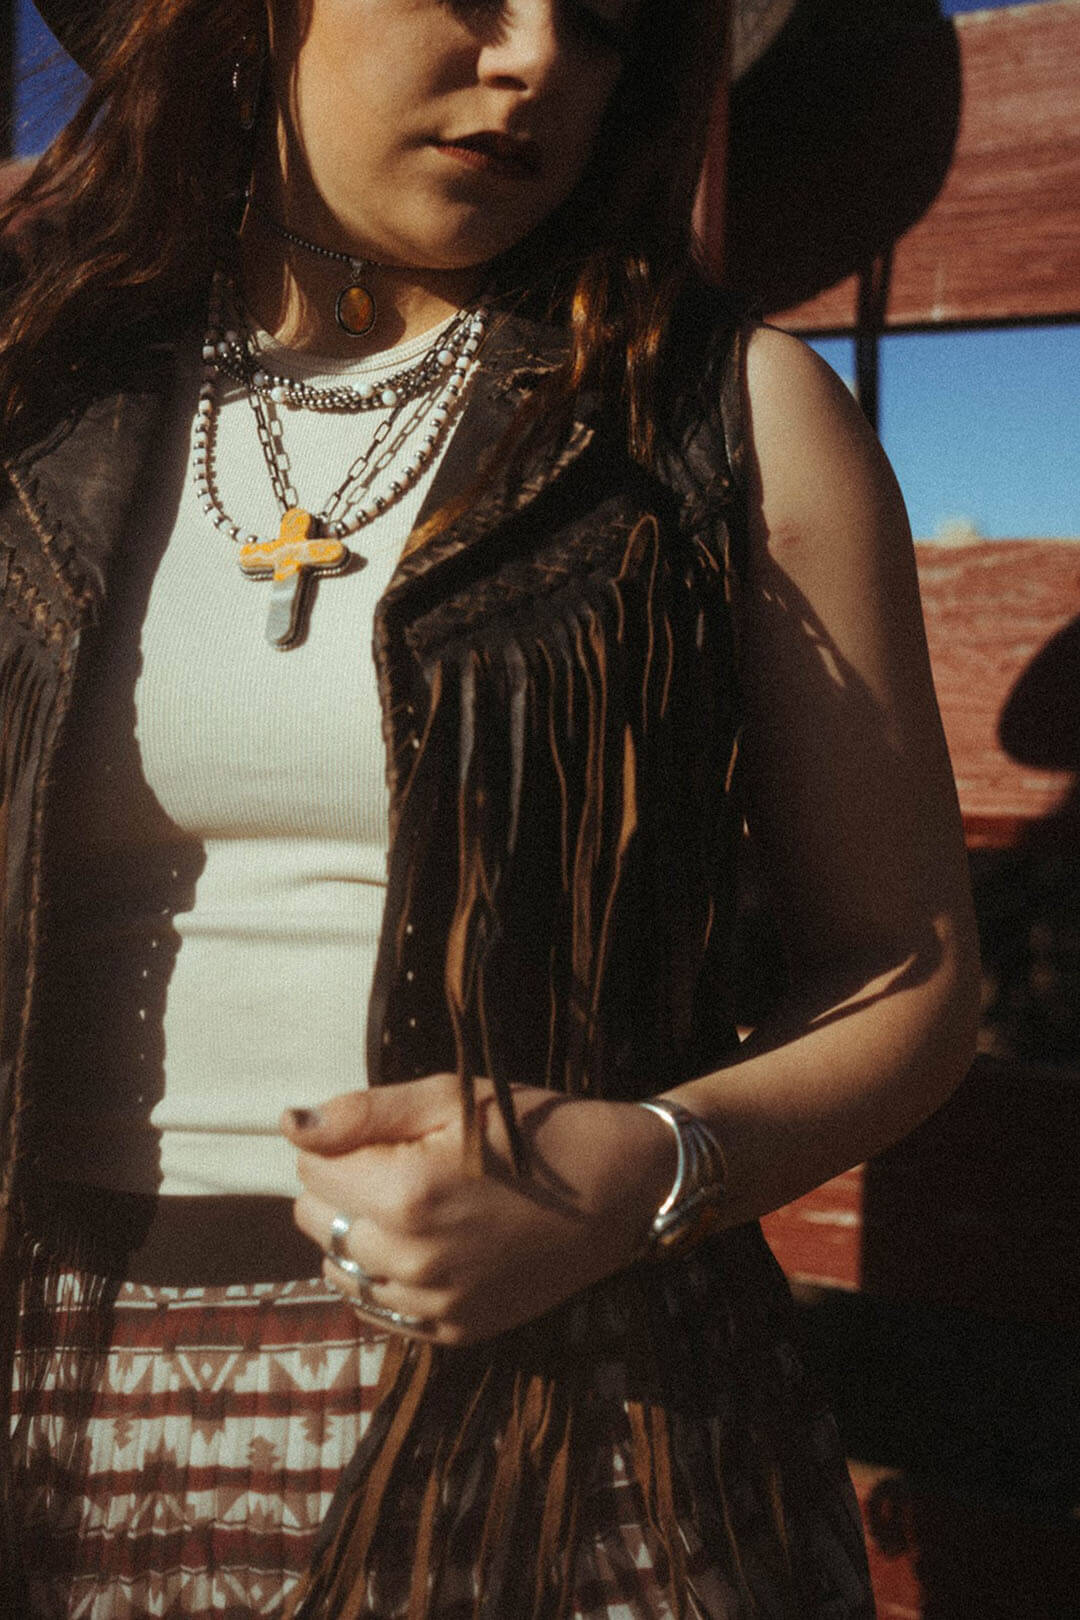 Close up image of the Cripple Creek Womens Fringe Leather Vest.  The vest has fringe on the bottom and on both sides.  